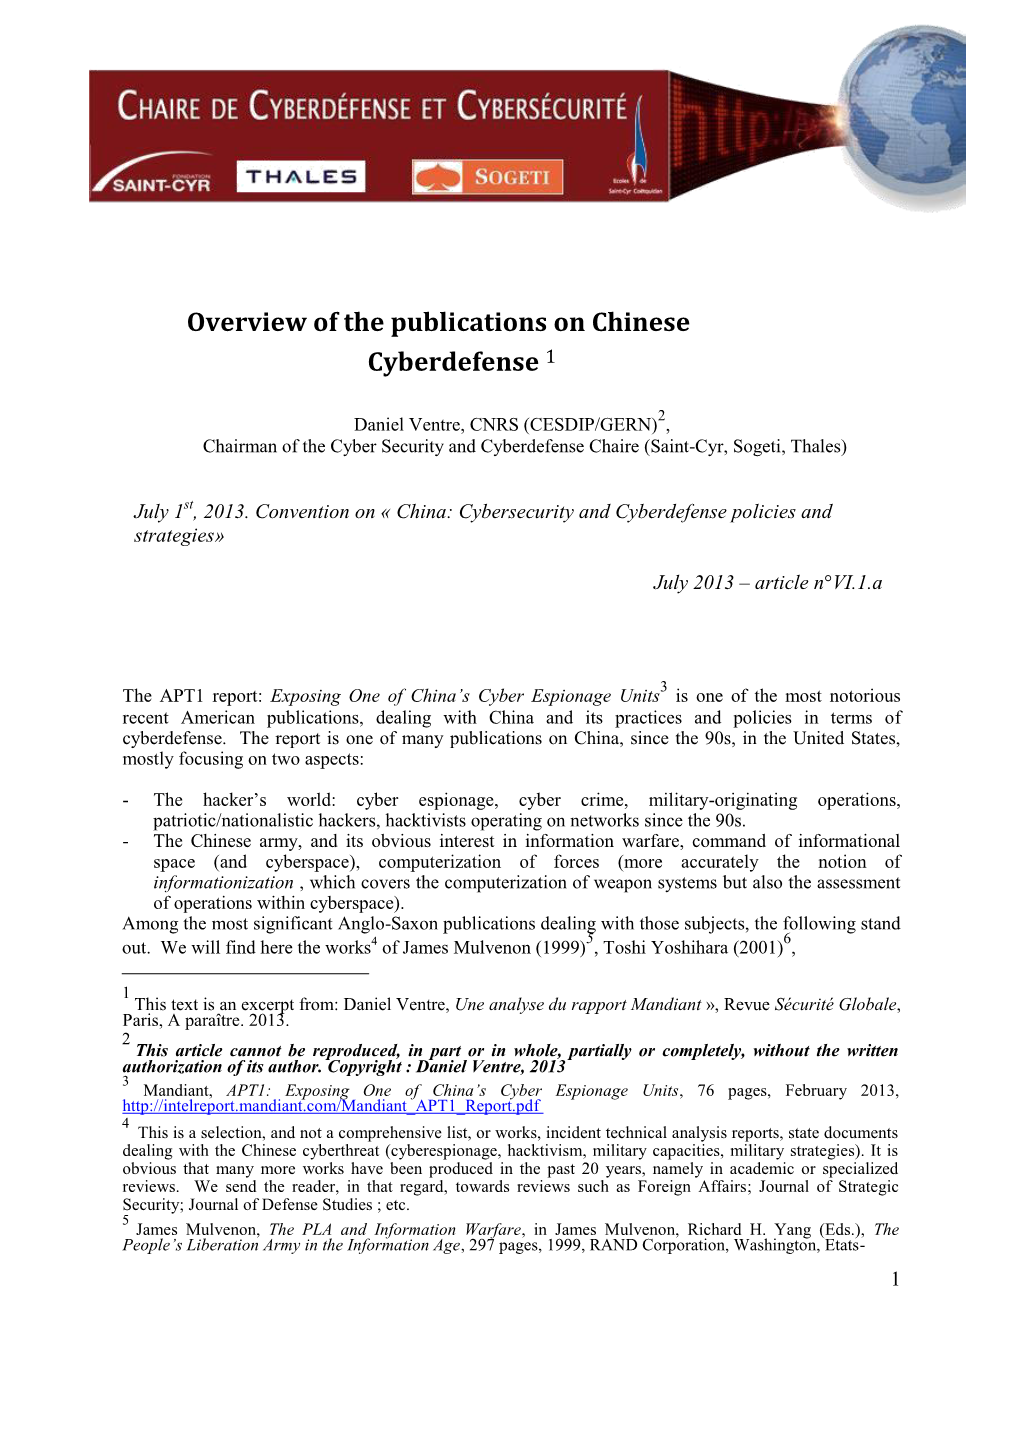 Overview of the Publications on Chinese Cyberdefense 1